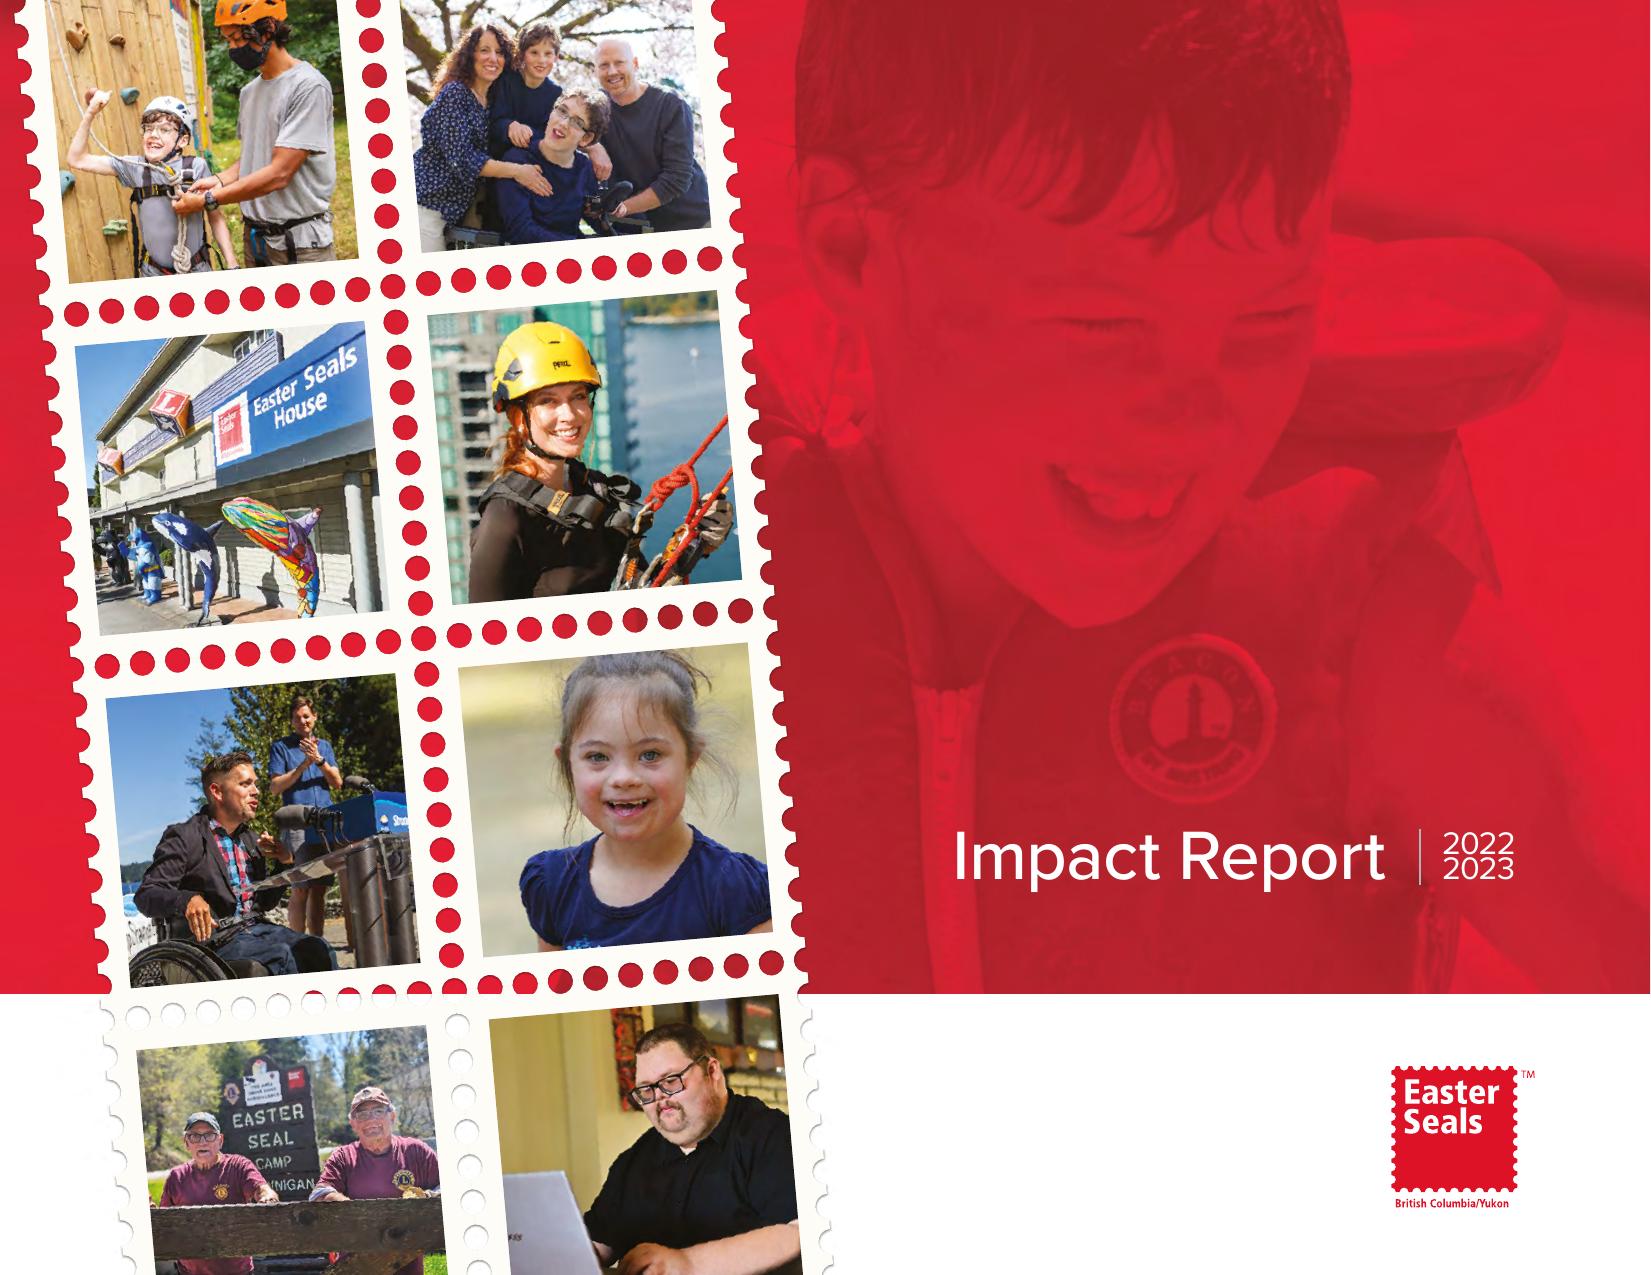 EASTERSEALSBCY 2023 Annual Report